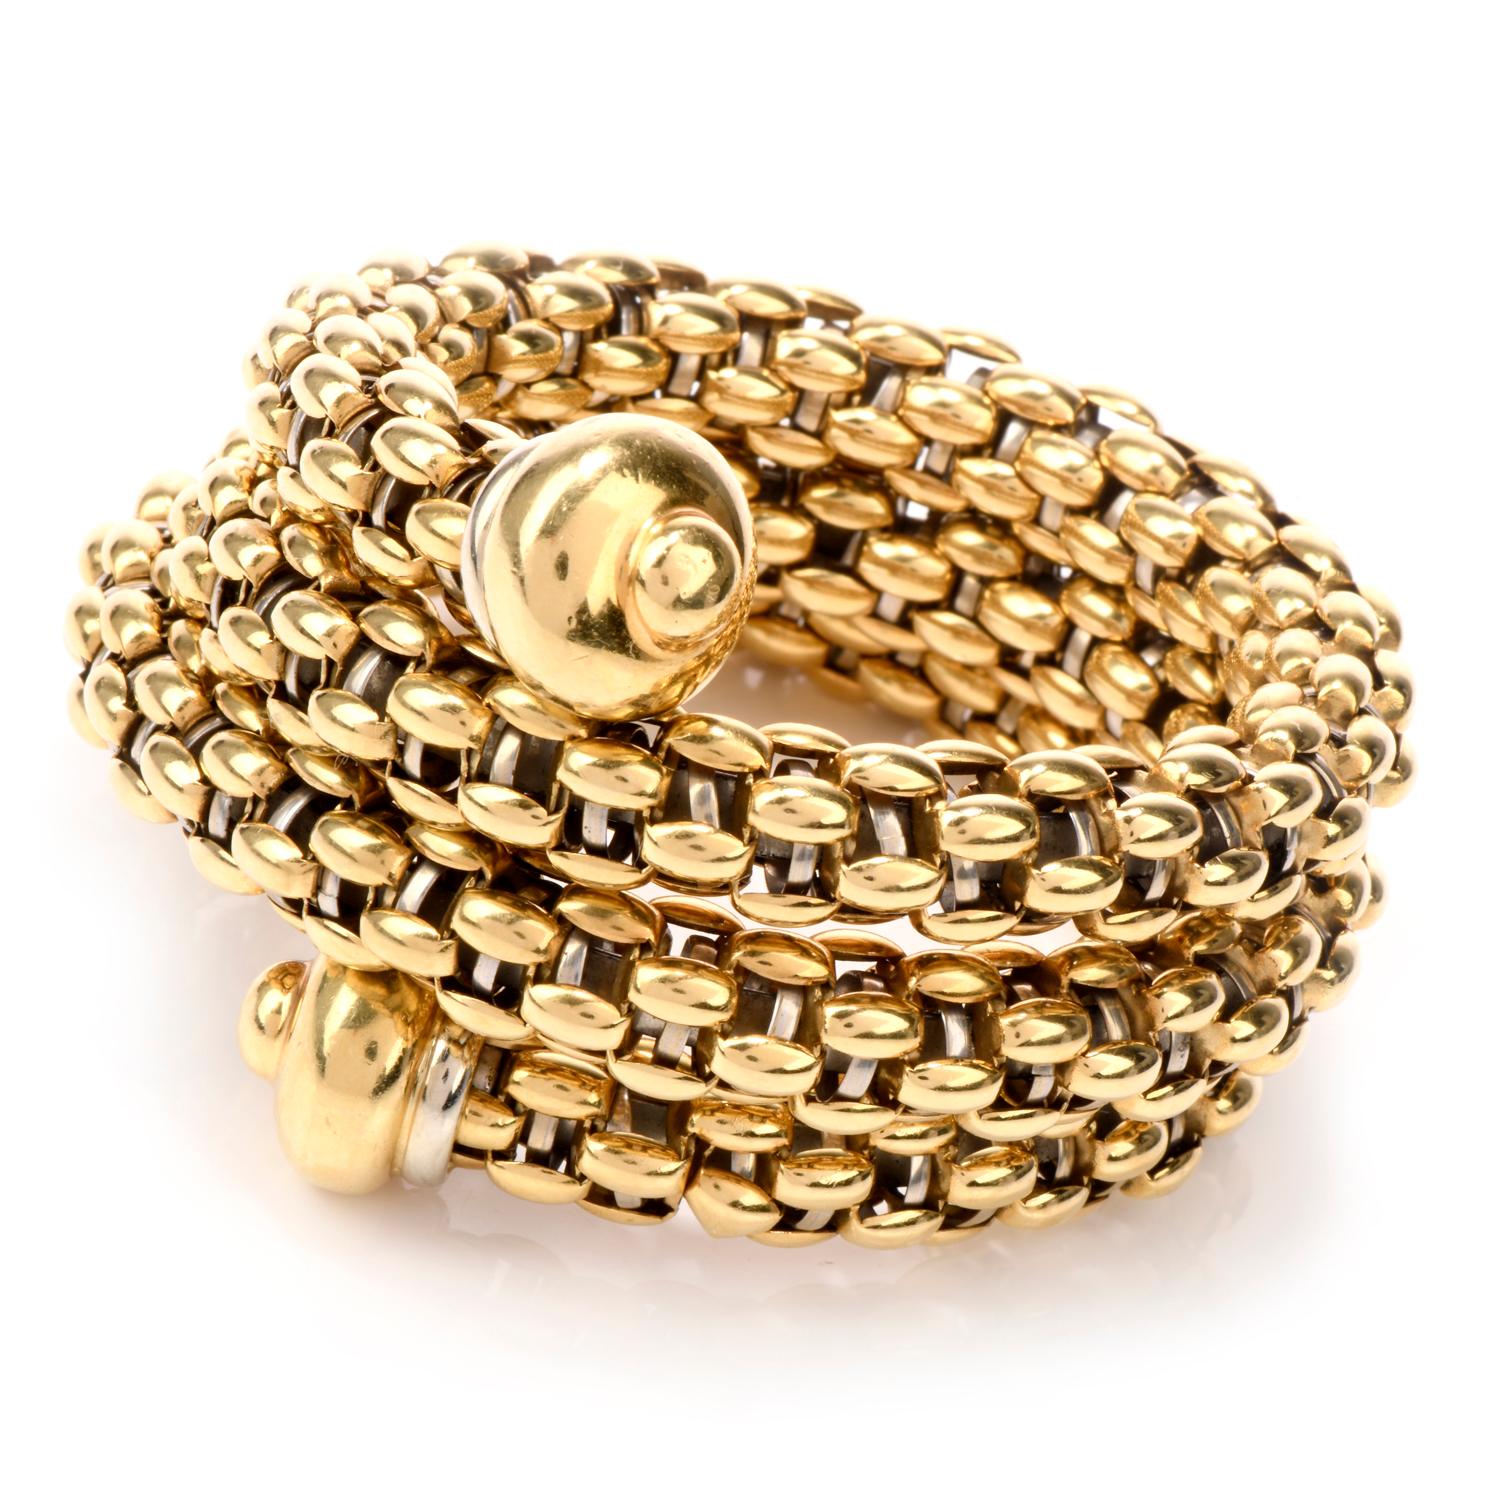 This exceptional Italian wrap around bangle bracelet is made in 18k yellow and white gold  The coil body wrap around at least 4 times from each end. This stylish high polish flexible italian gold very stylish is very confortable to wear. 

Weight: